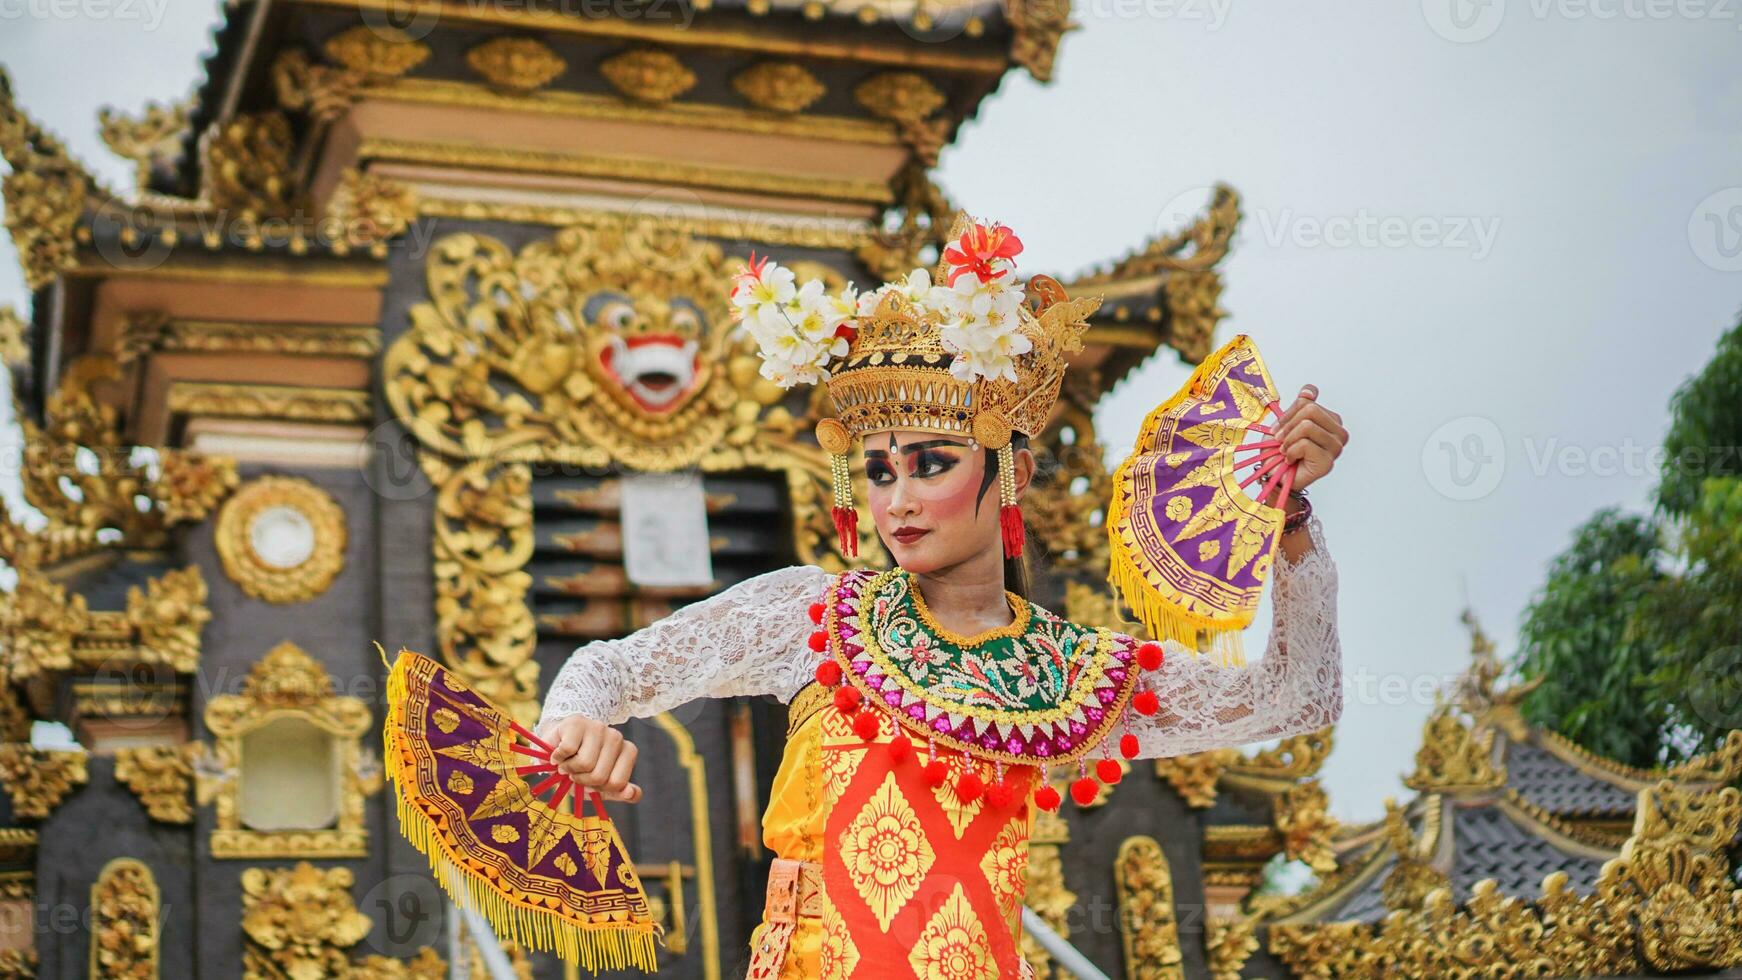 girl wearing Balinese traditional dress with a dancing gesture on Balinese temple background with hand-held fan, crown, jewelry, and gold ornament accessories. Balinese dancer woman portrait photo